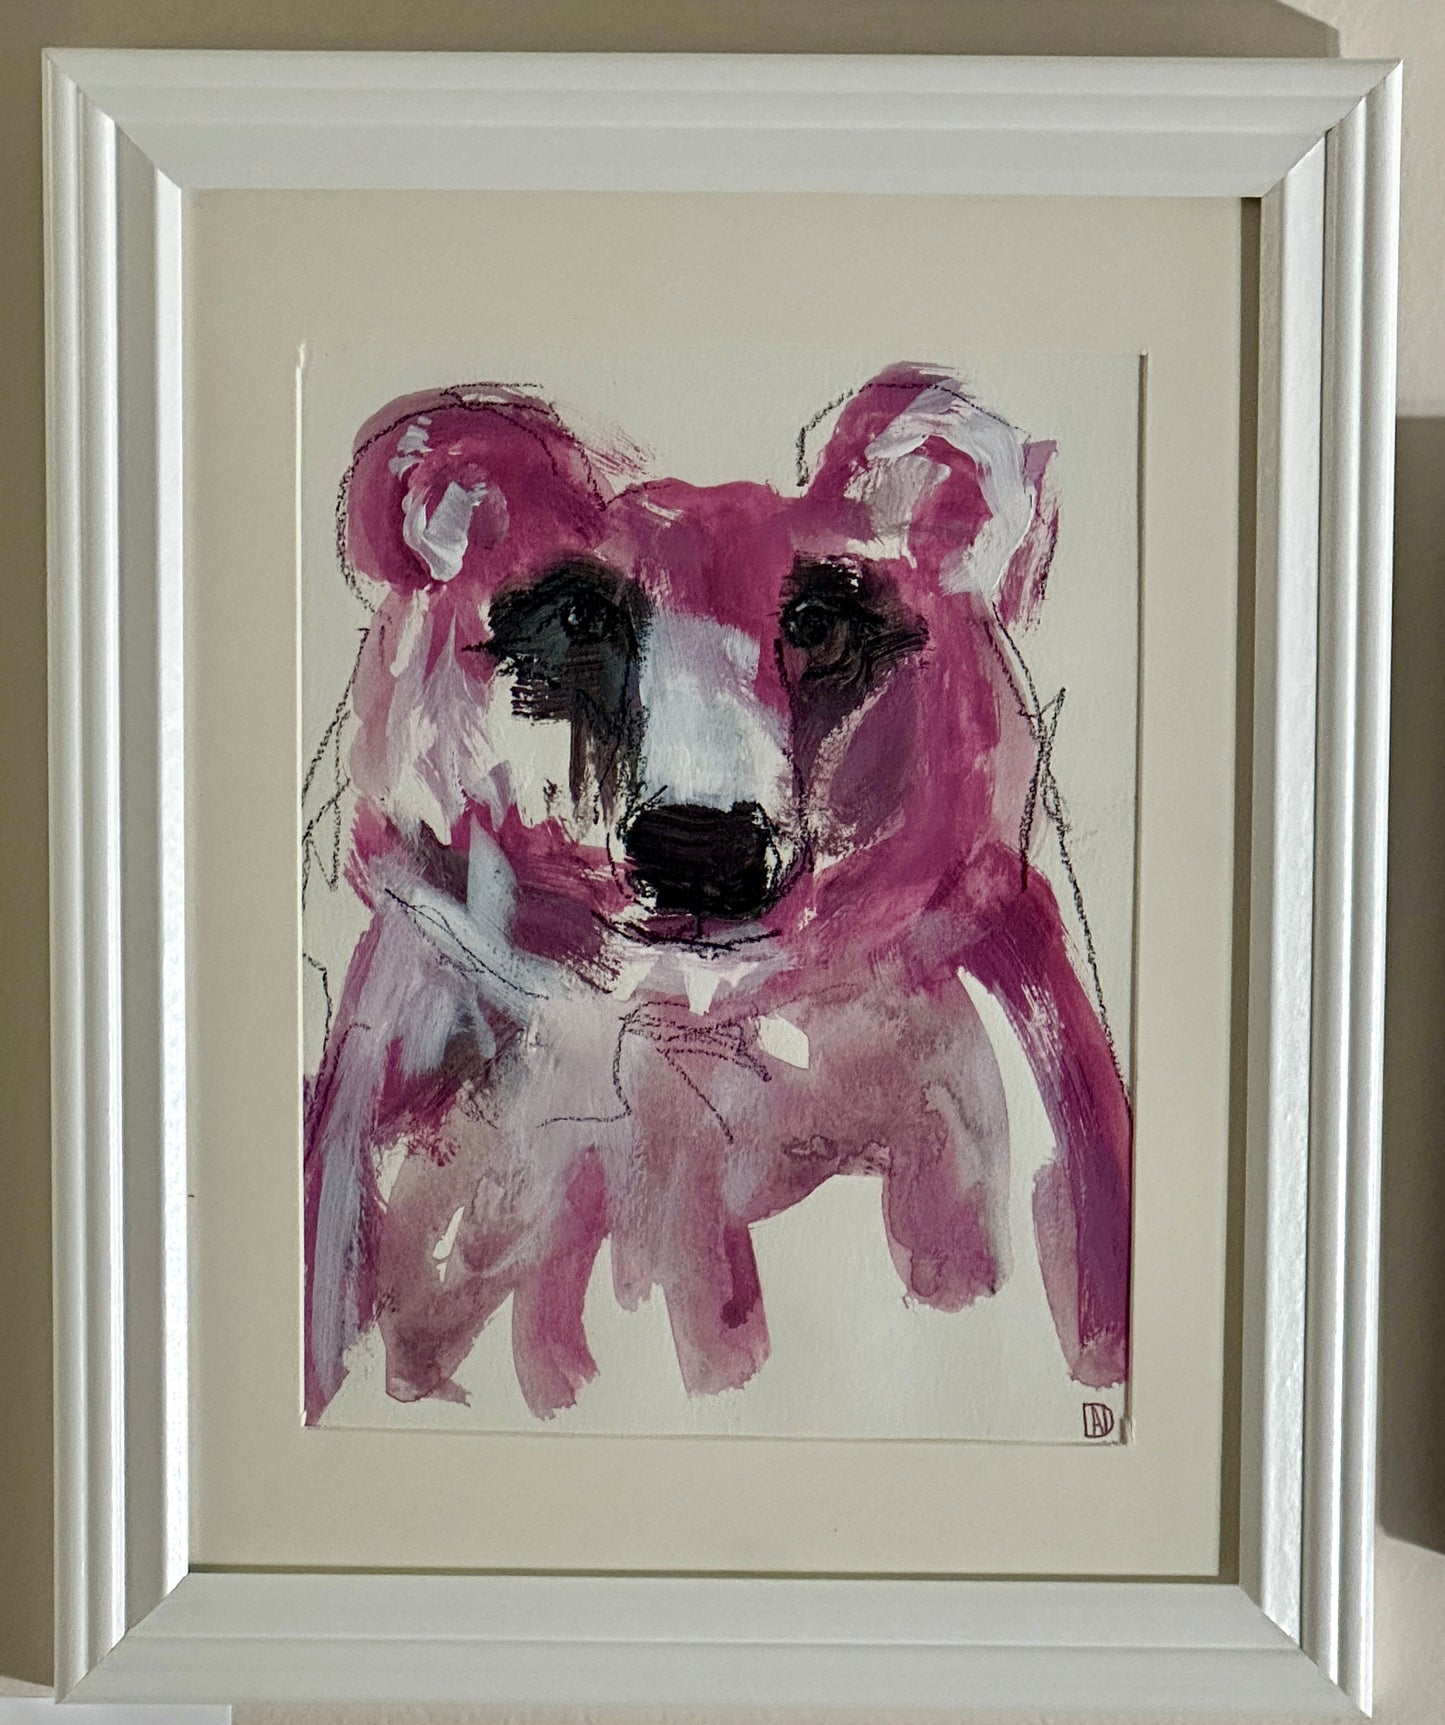 Bear by Artist Dianna Page Beck - Acrylic Oil Pastel on Paper, 9" x 12" Print (12" x 15" Framed)